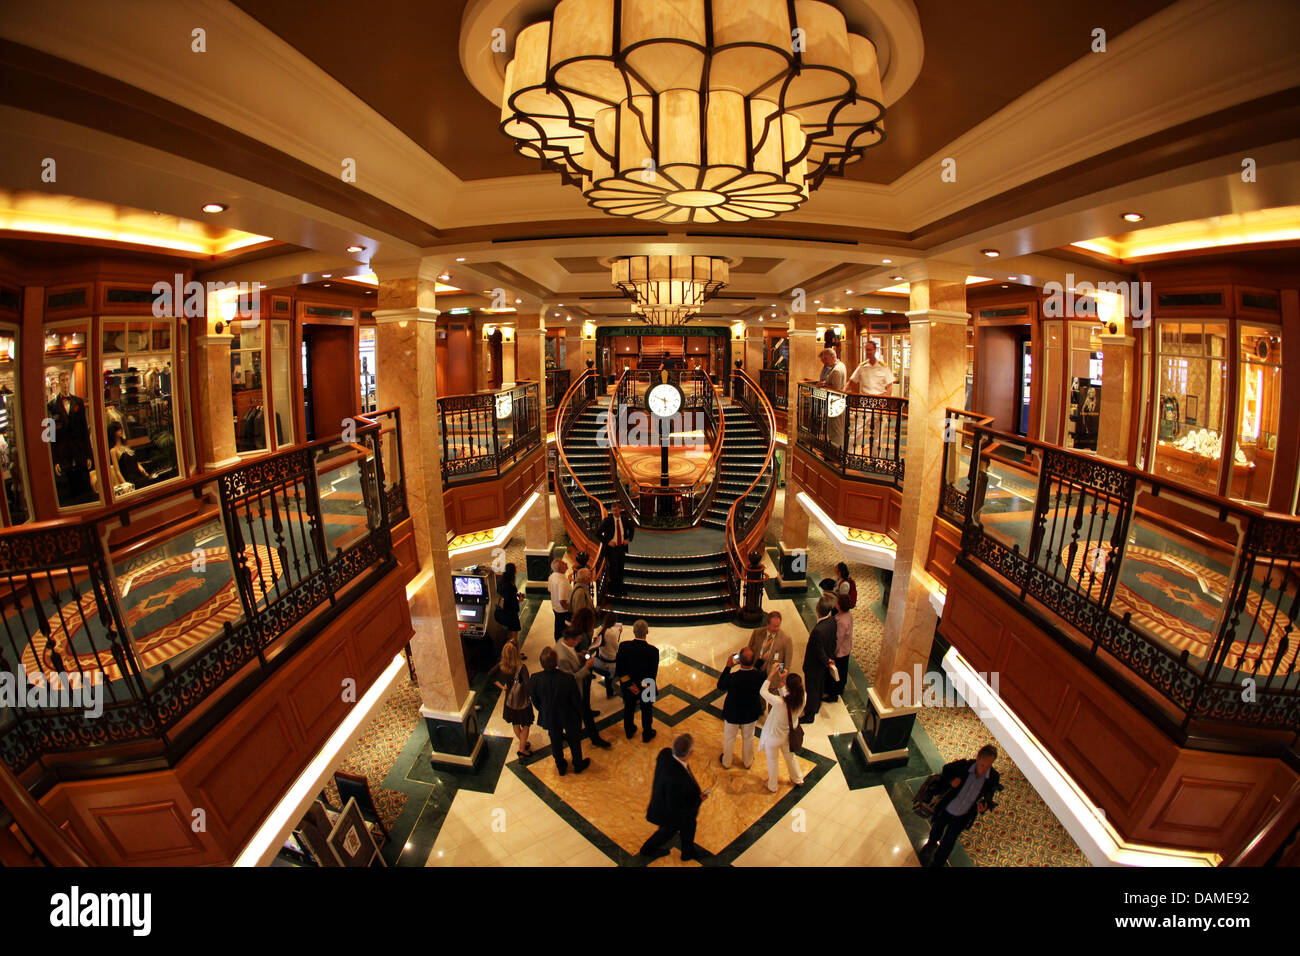 A shopping mall is pictured onboard the 'Queen Elizabeth' at the harbour in  Luebeck, Germany, 4 June 2011. The cruise ship which is named after the  British Queen visits Germany for the